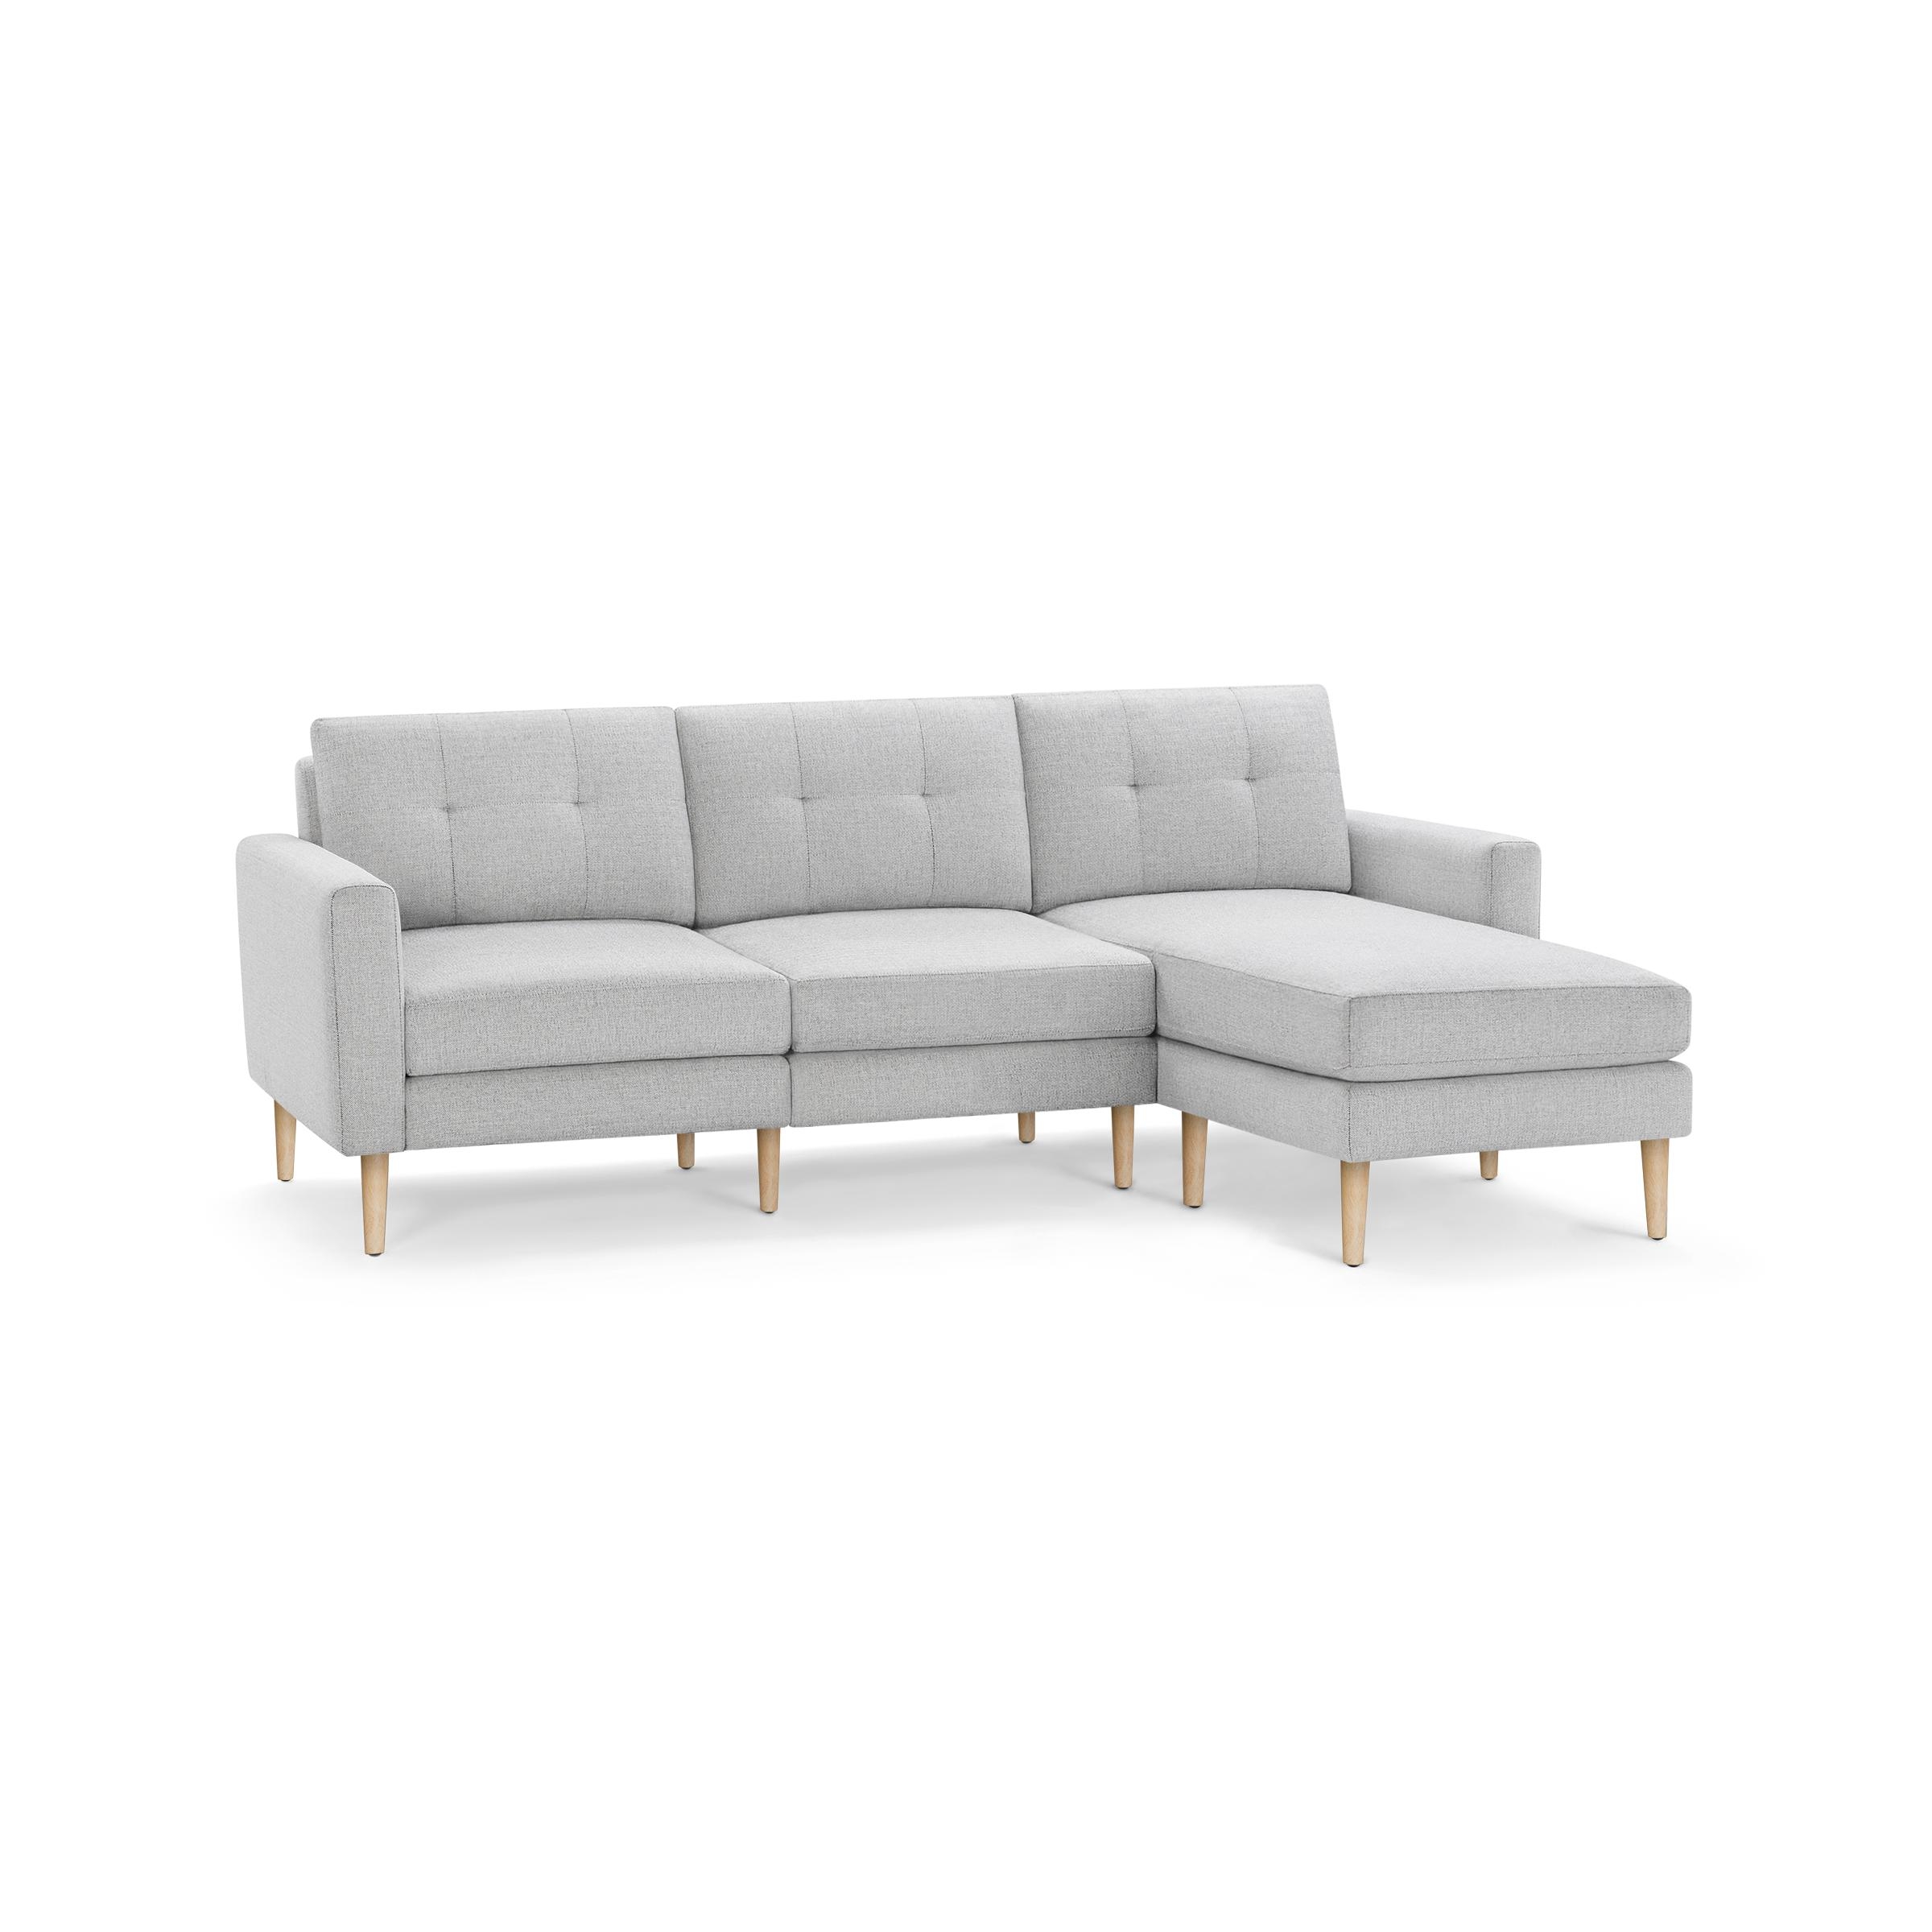 The Block Nomad Sectional Sofa in Crushed Gravel, Oak Legs - Image 0